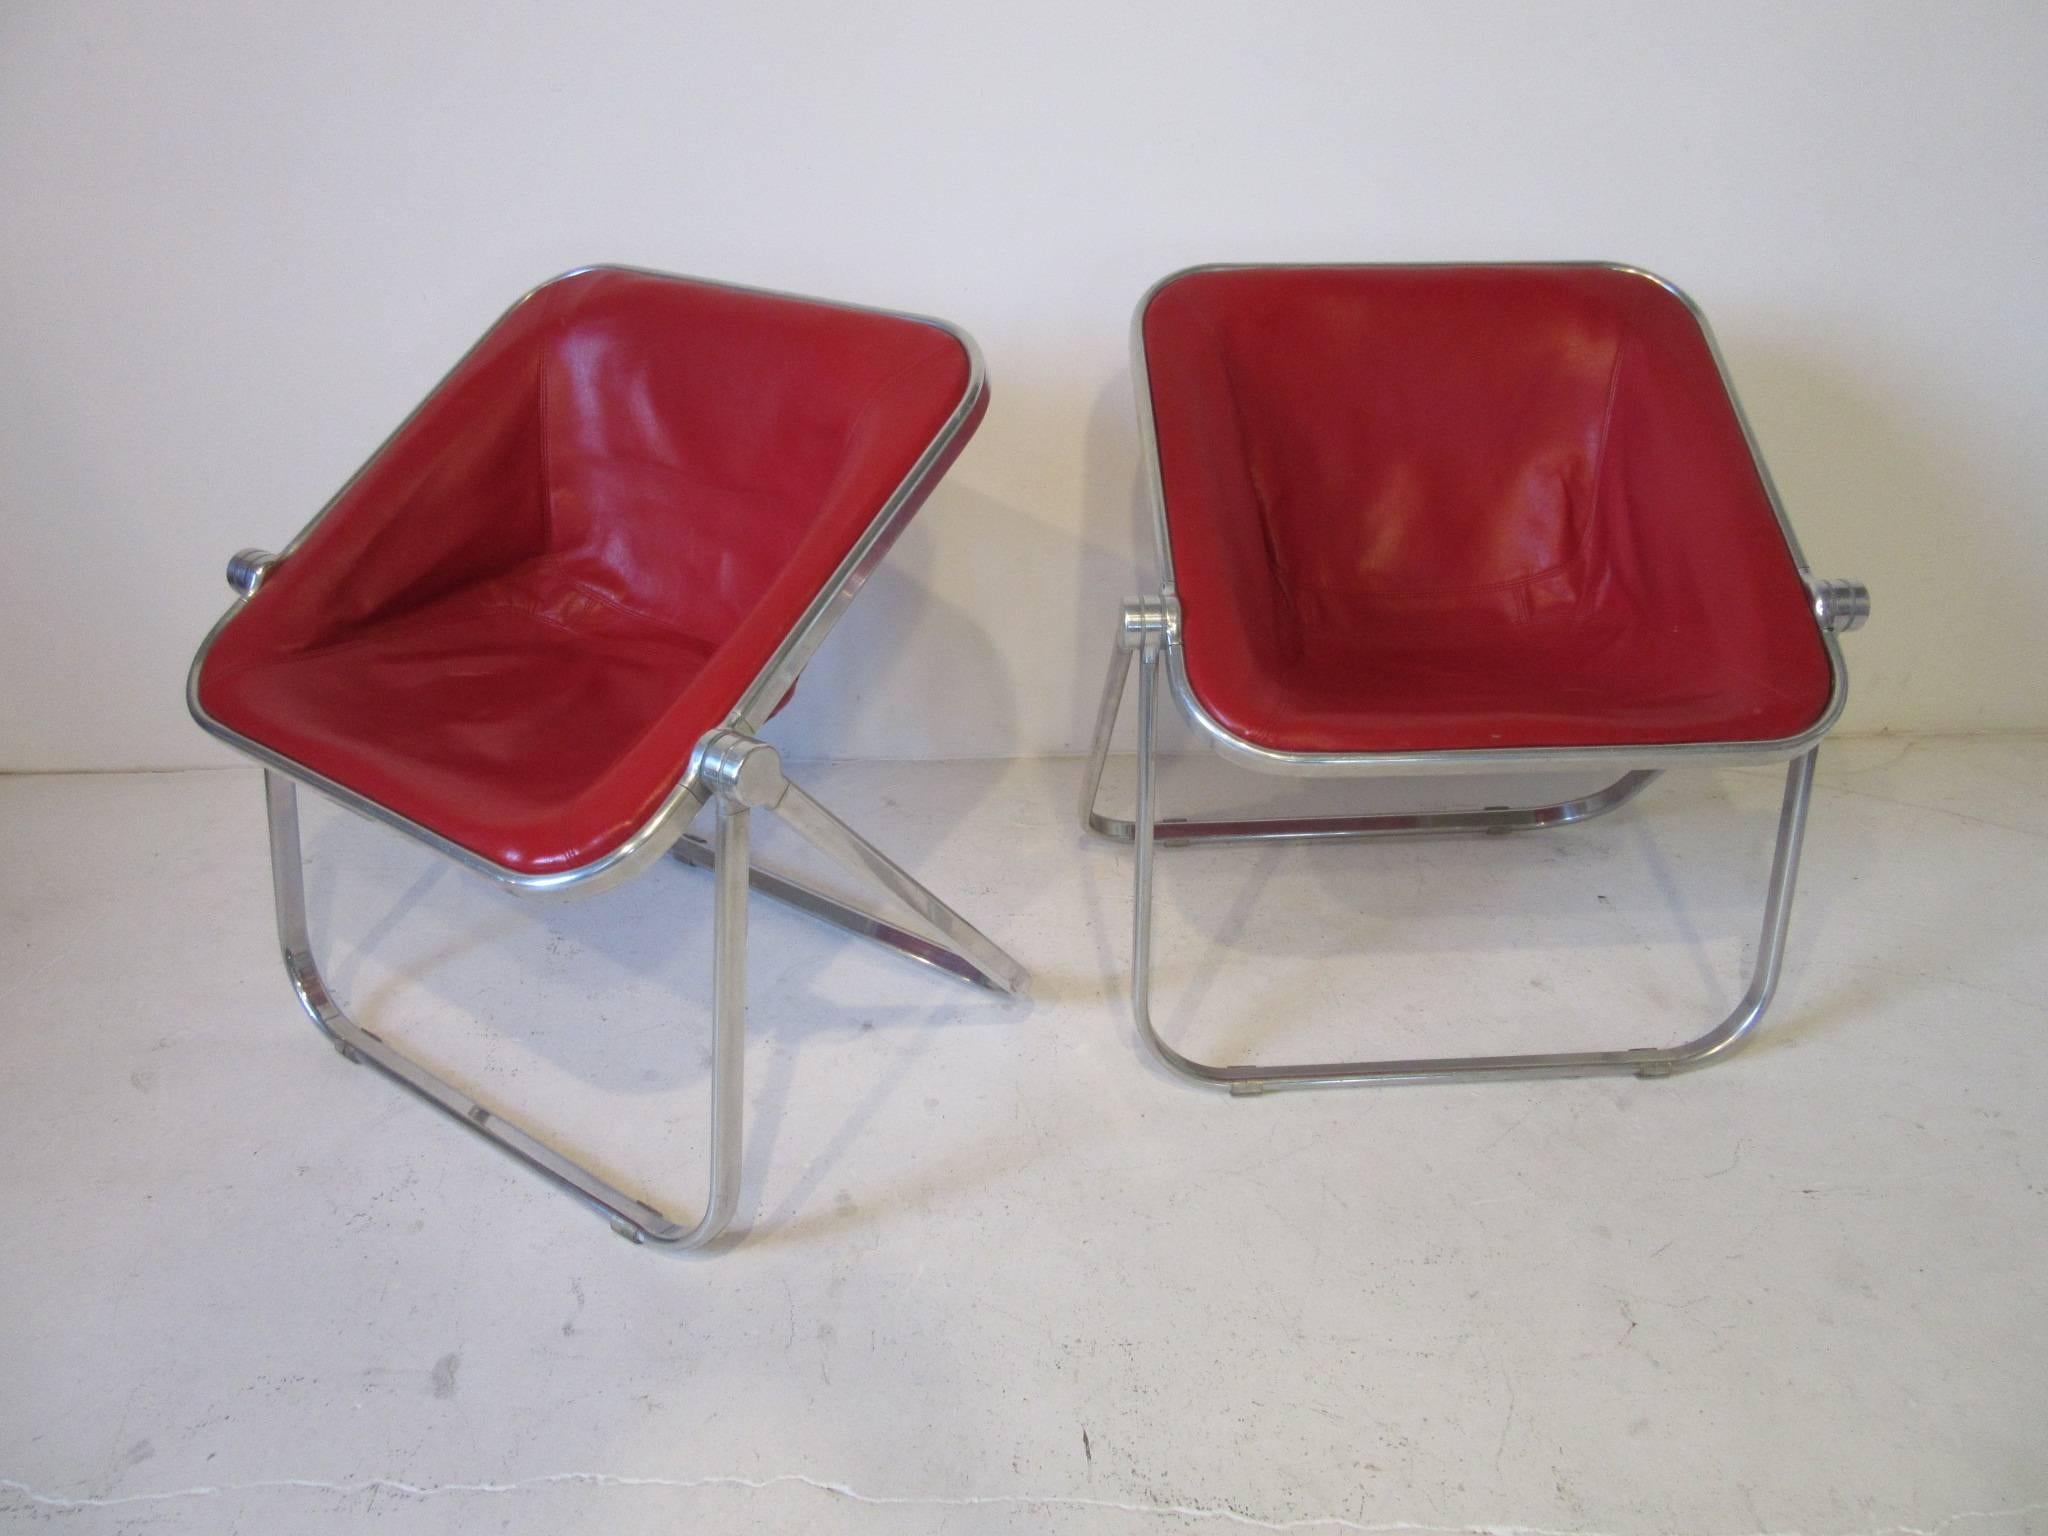 A pair of aluminum framed and lip stick red leather Plona chairs, these well designed chairs are comfortable and fold flat for storage which is great for a smaller space. Retains the manufactured label Plona Made in Italy JSC Divisione Sedie.